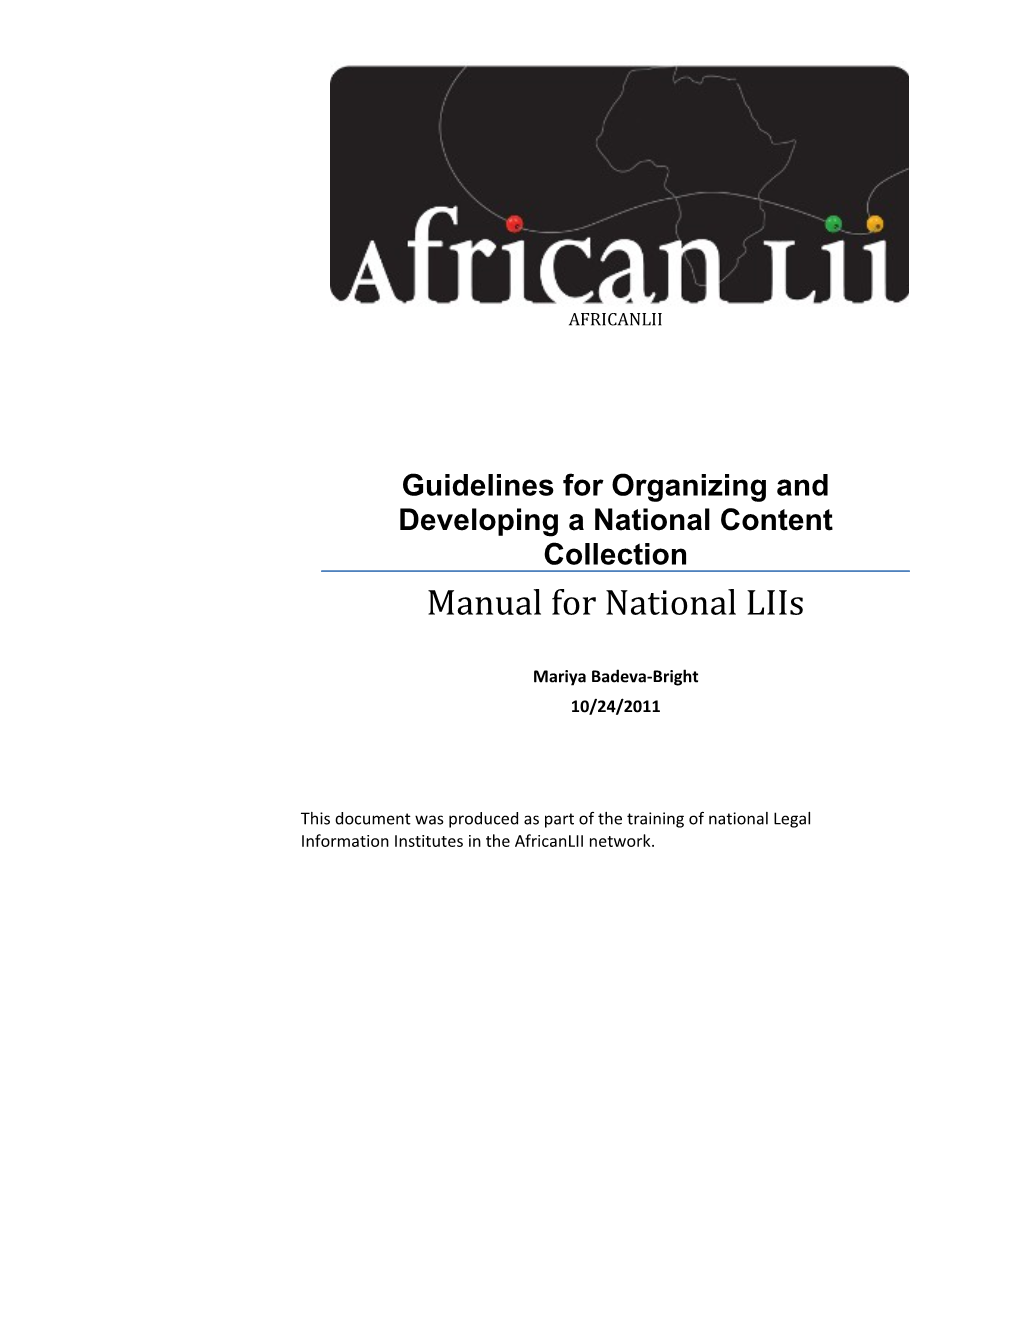 Guidelines for Organizing and Developing a National Content Collection